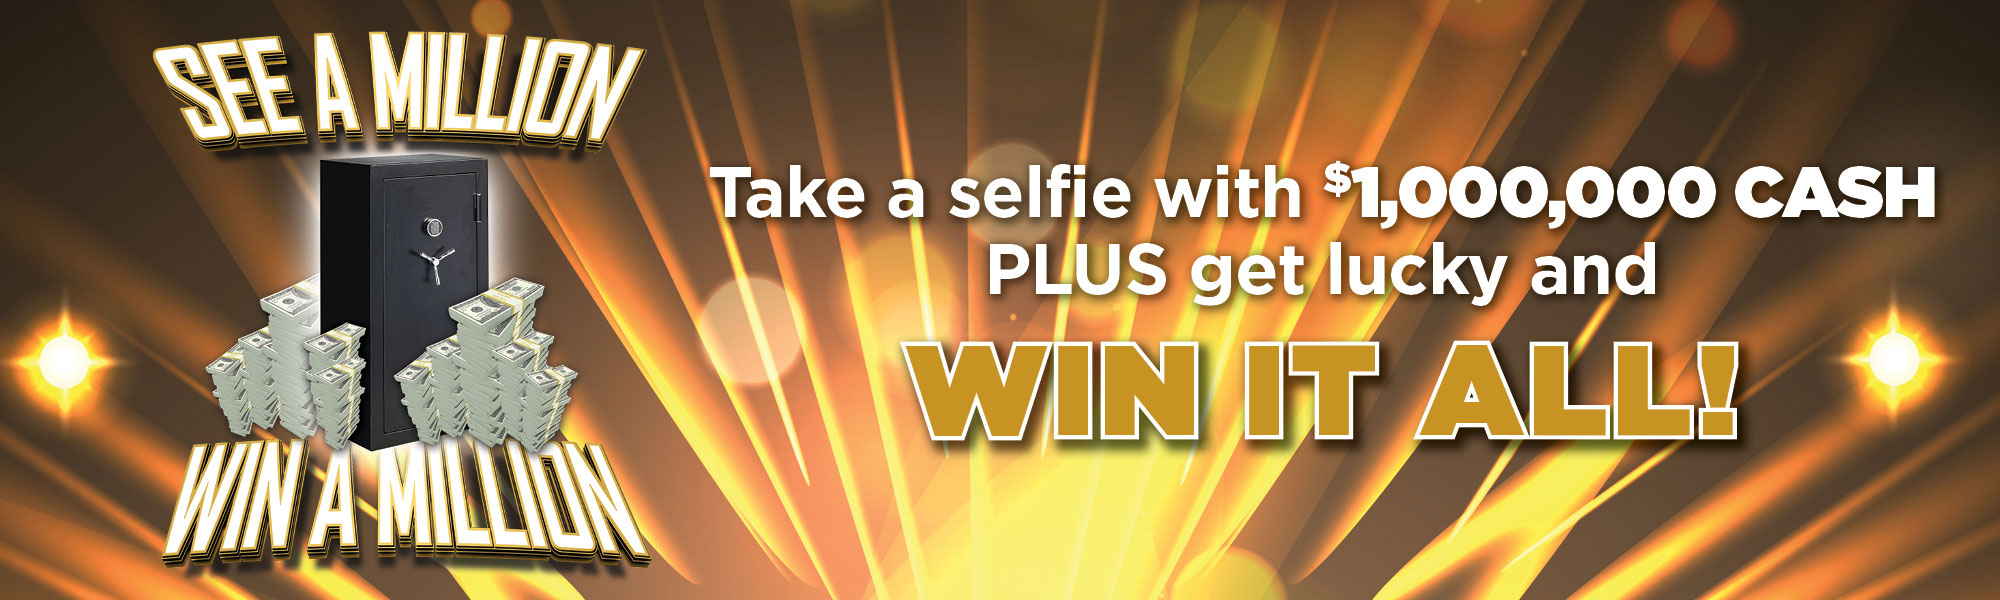 See a Million, Win a Million - Take a selfie with $1,000,000 CASH PLUS get lucky and WIN IT ALL!